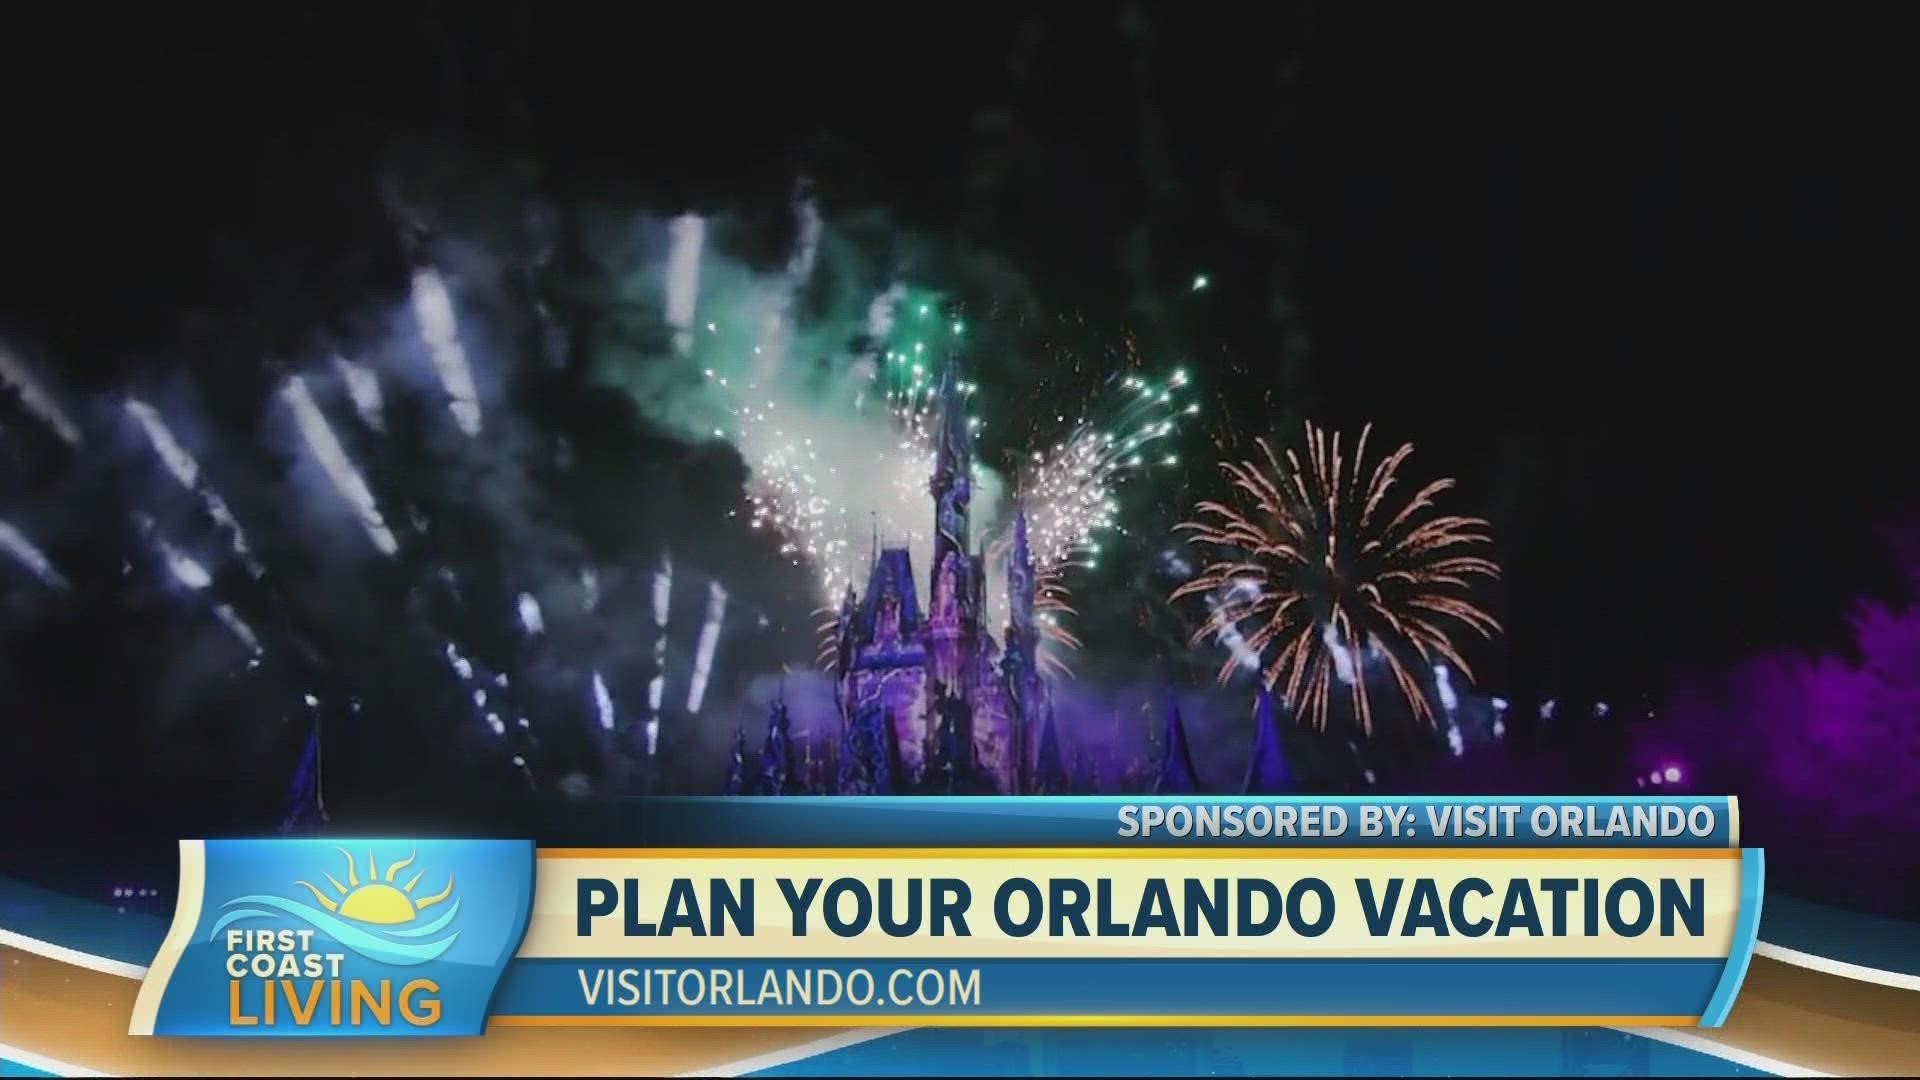 President and CEO of Visit Orlando, Casandra Matej shares her resort recommendations and advice on vacation planning.